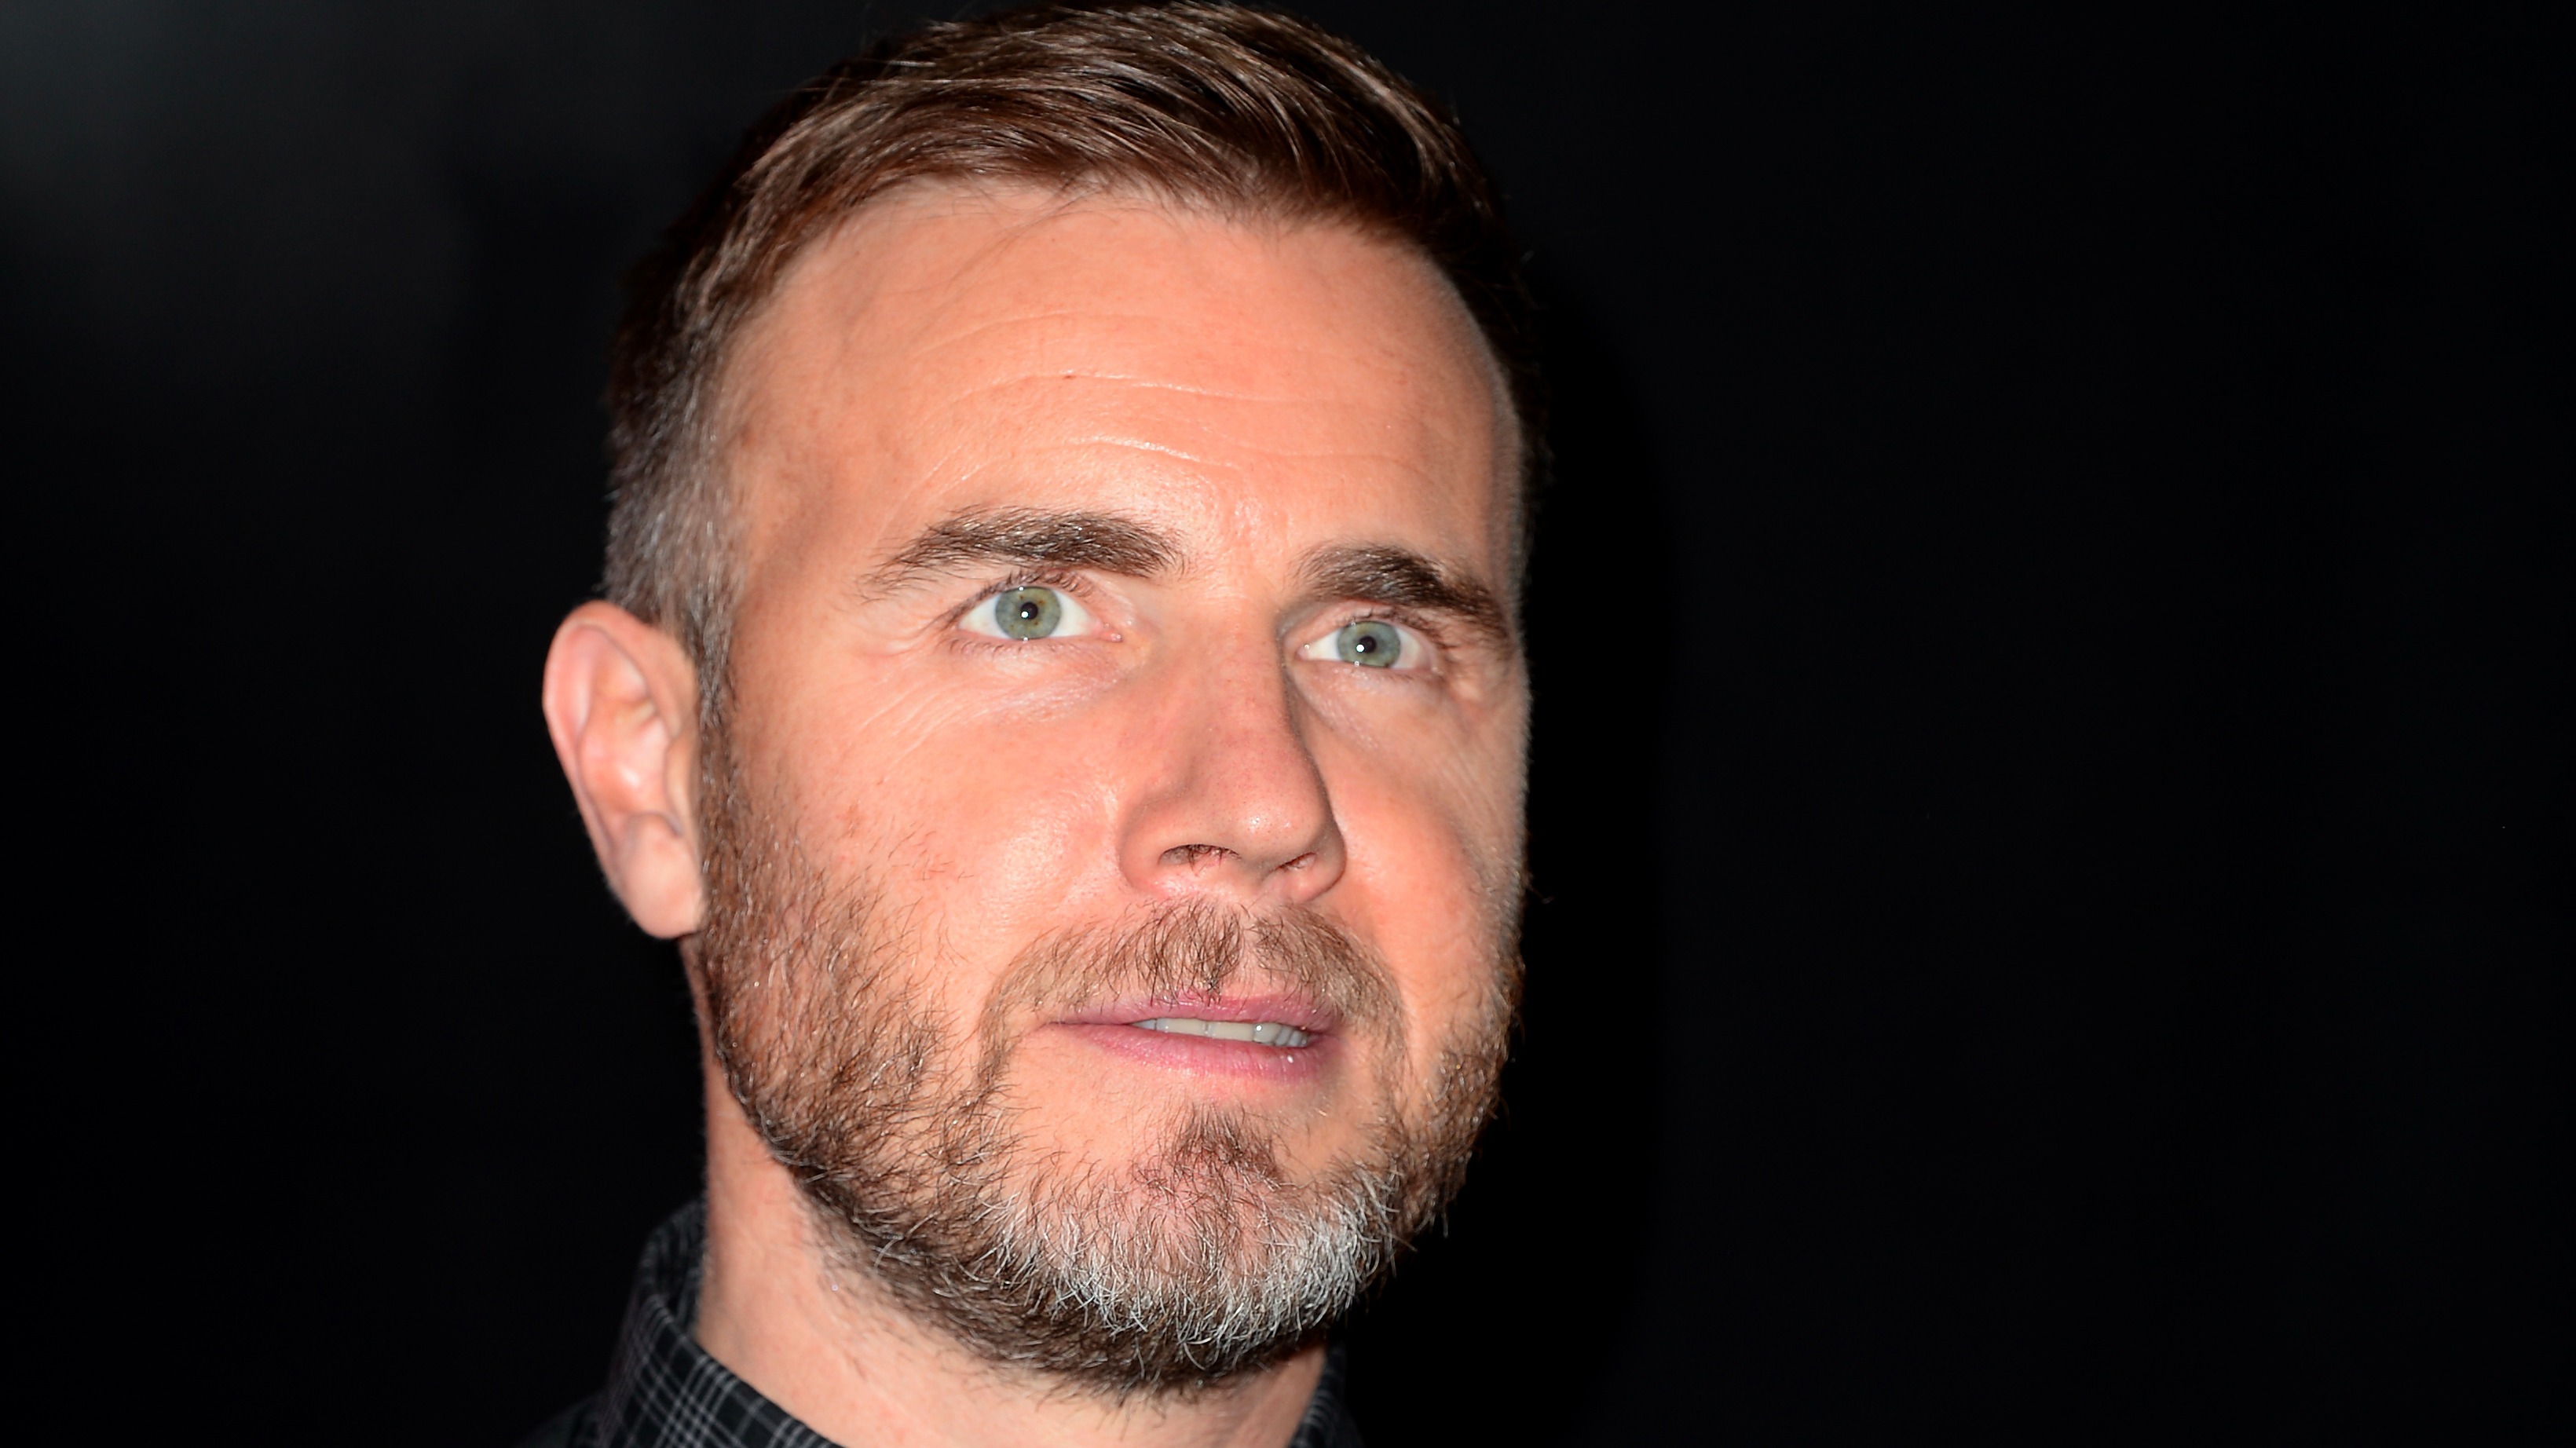 Gary Barlow Wallpapers Images Photos Pictures Backgrounds